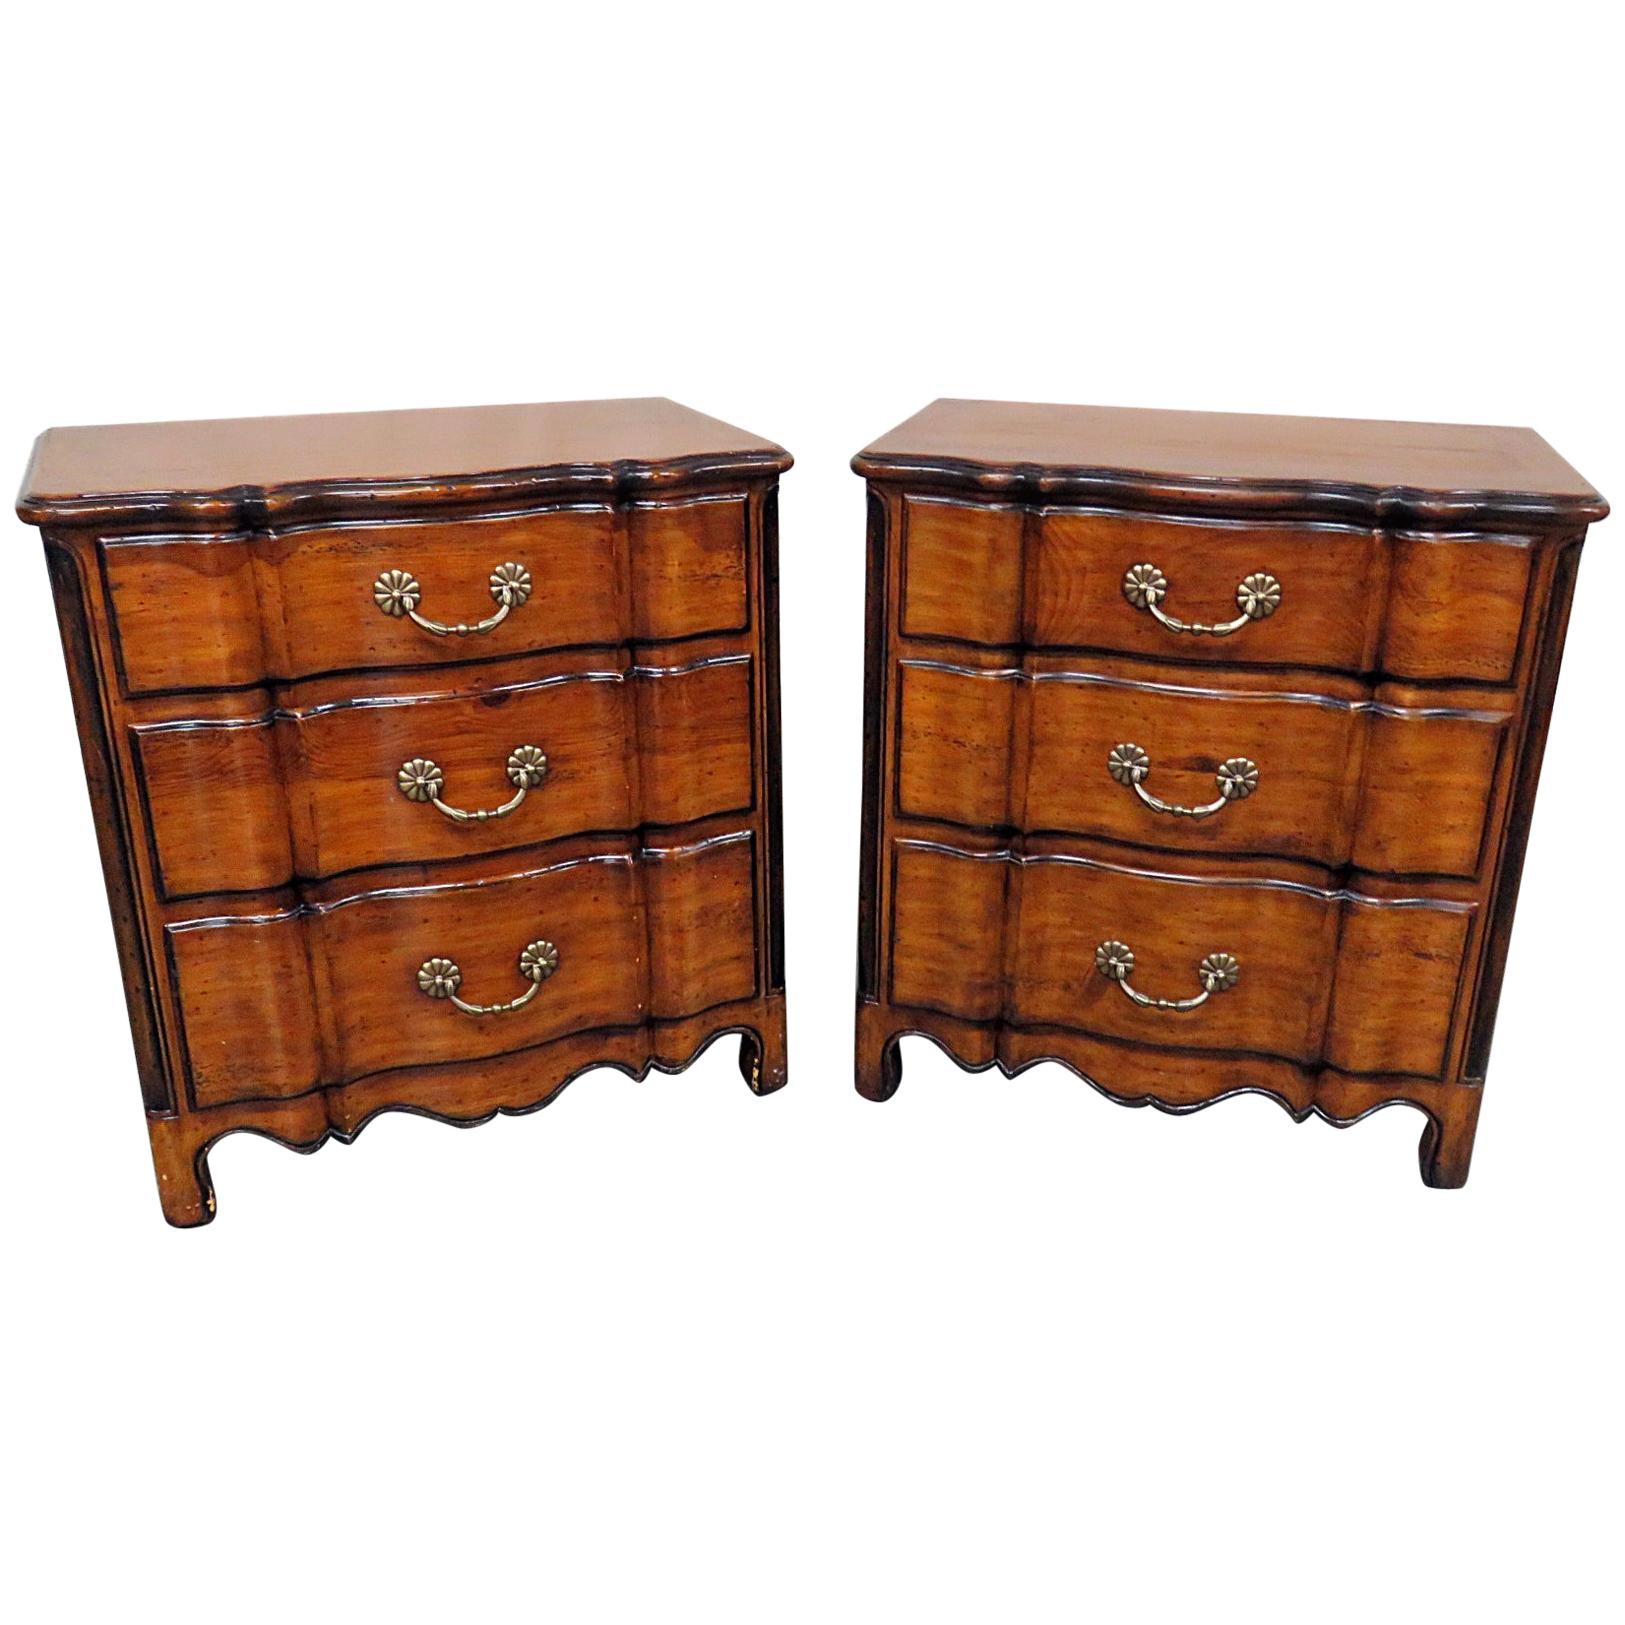 Pair of Theodore Alexander Chateau Du Vallois Commodes Nightstands